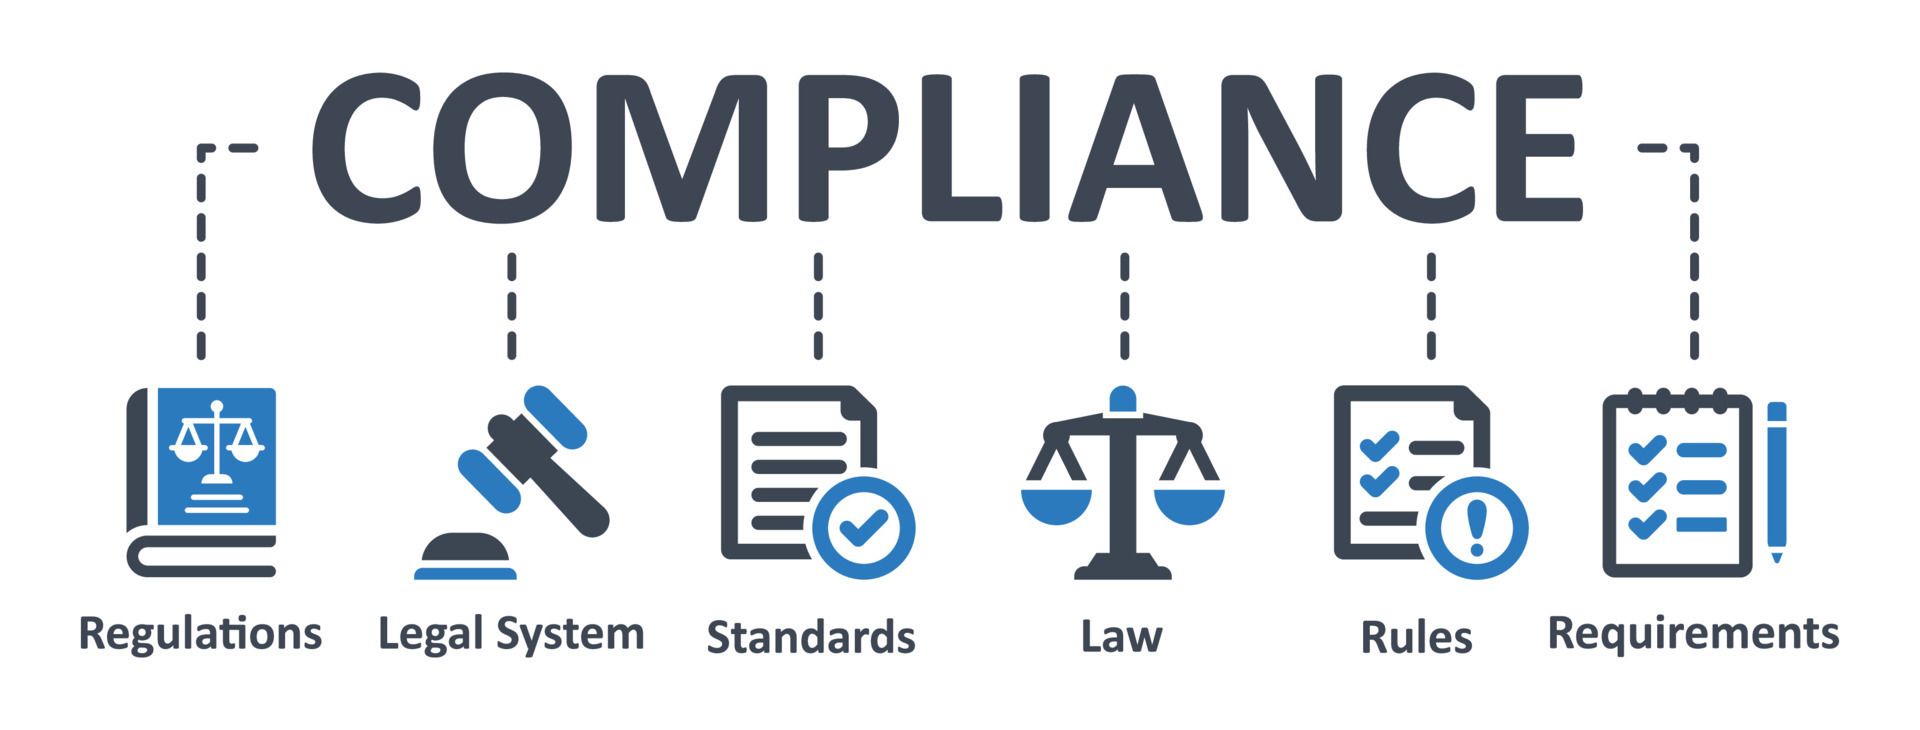 compliance_icon_illustration_compliance_regulations_standard_requirements_governance_law_infographic_template_presentation_concept_banner_pictogram_icon_set_icons_vector_939034efa7.jpg